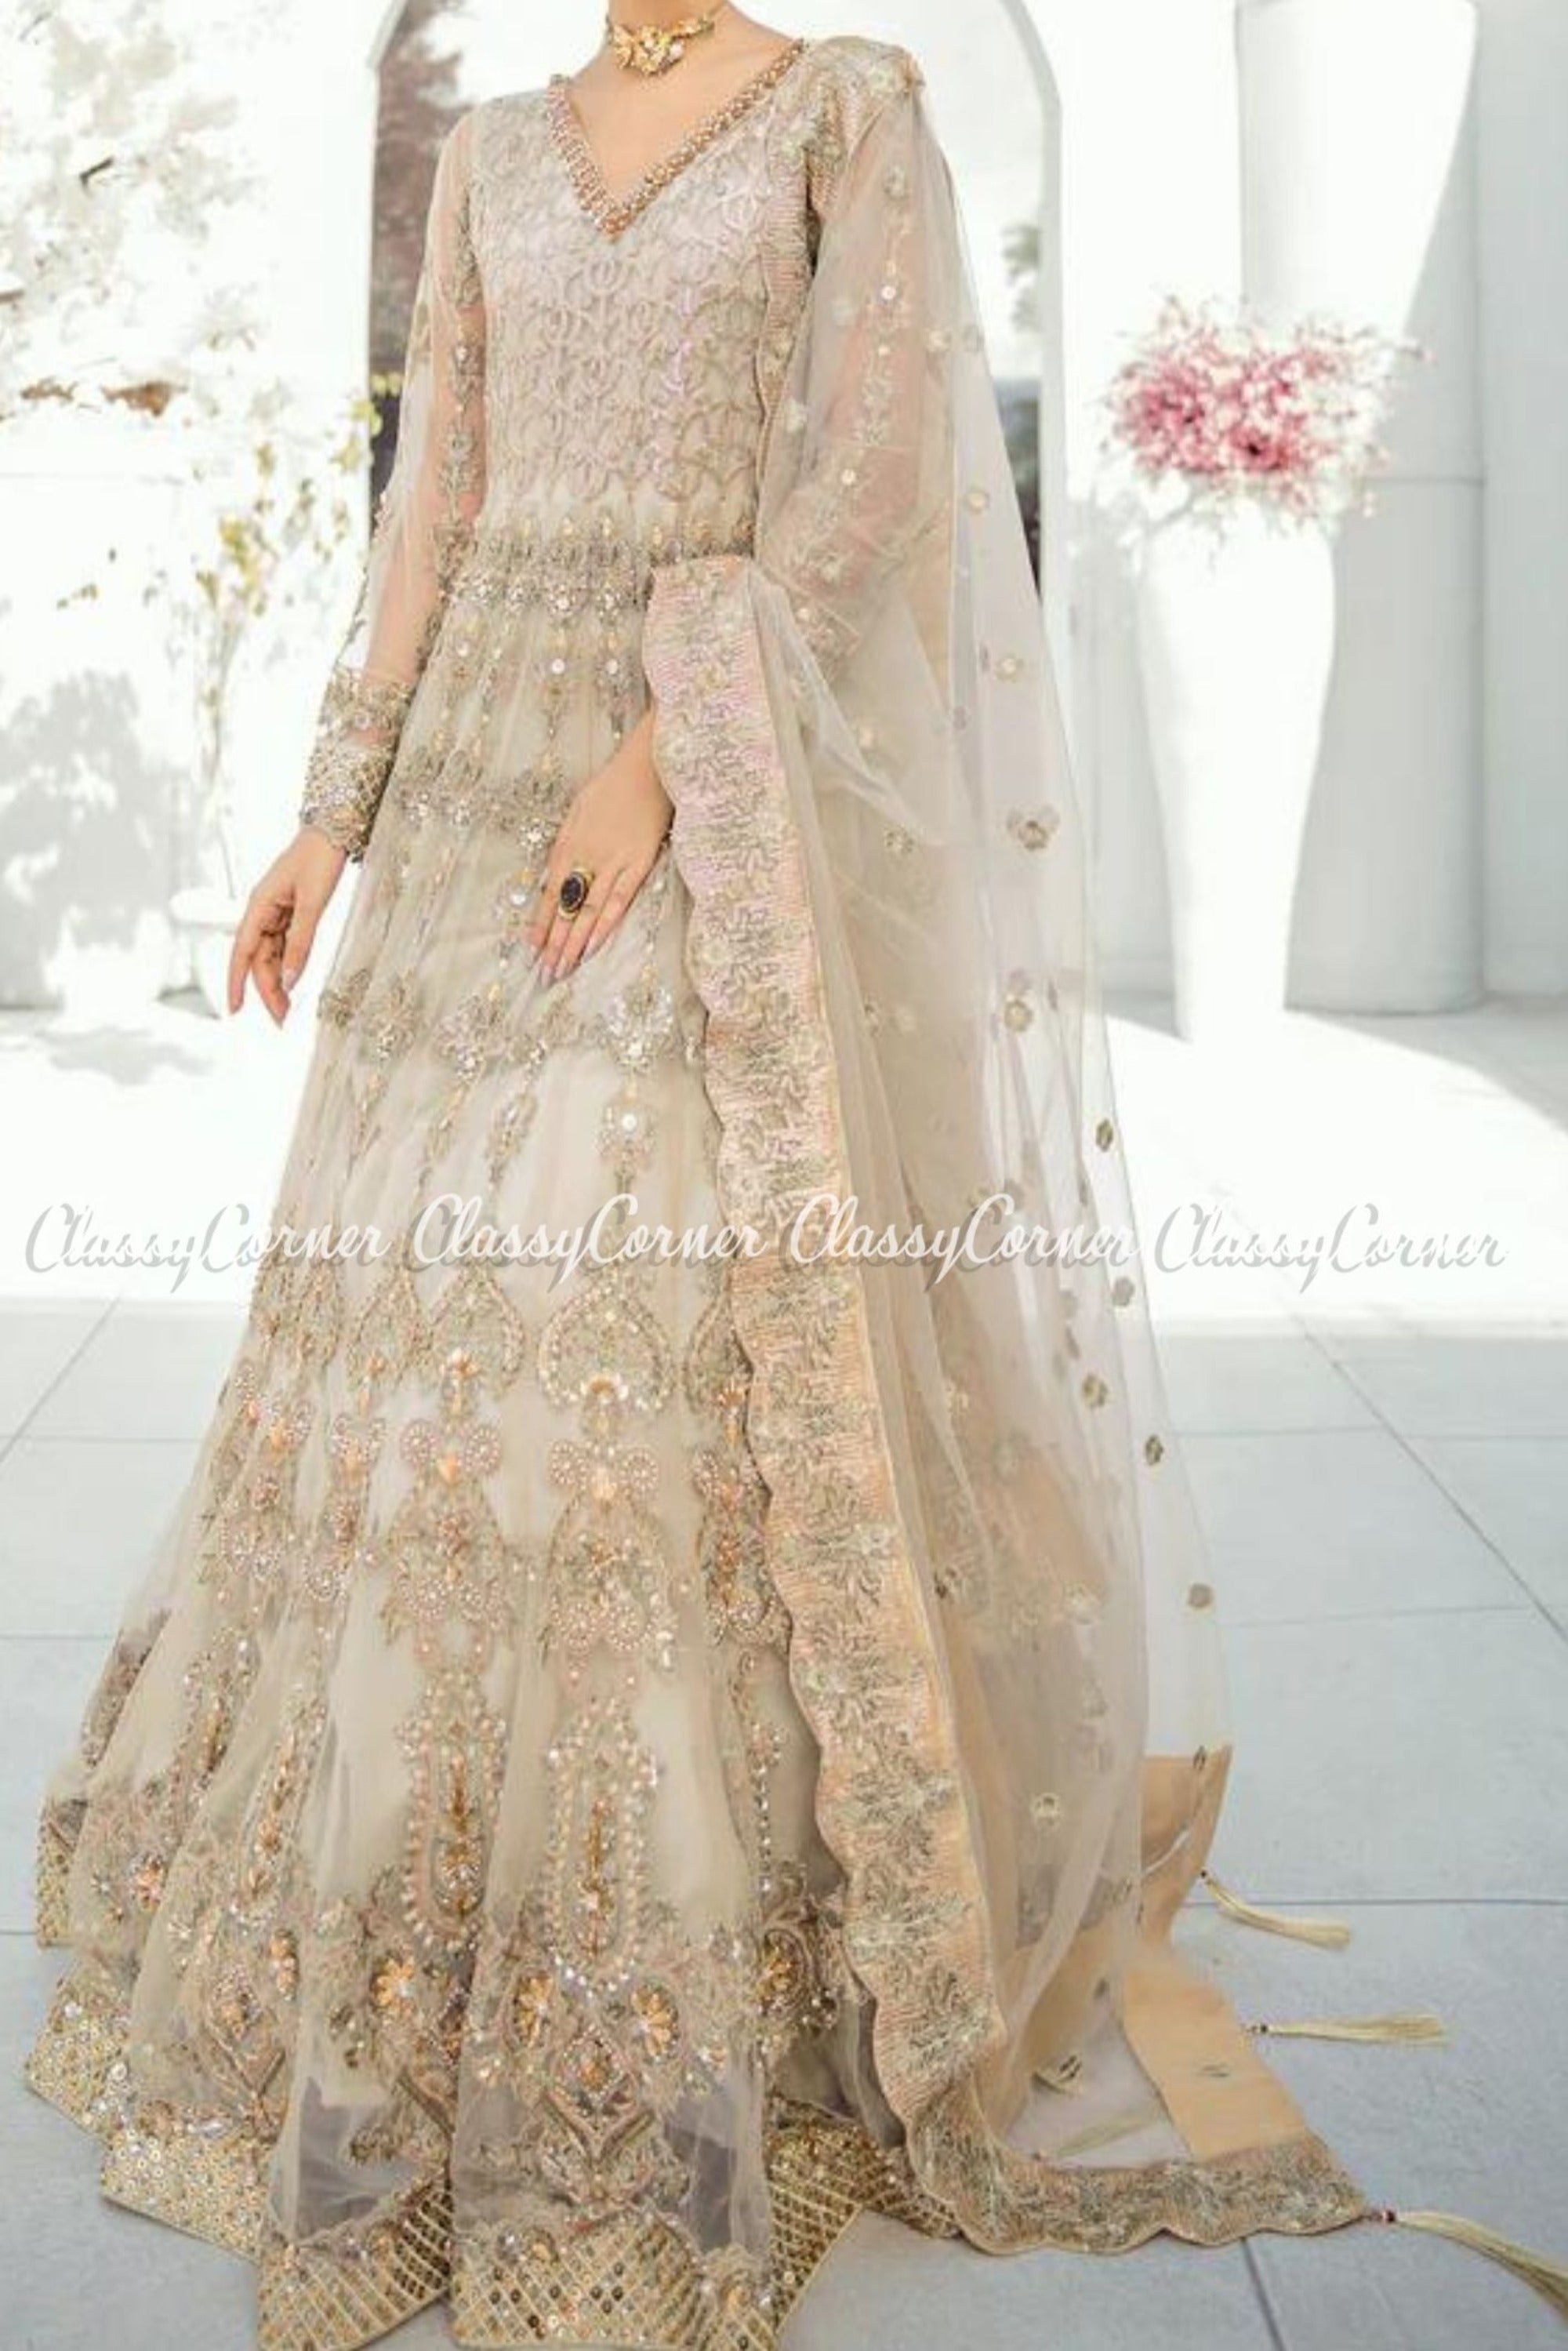 Beige Cream Pakistani Formal Party Gown